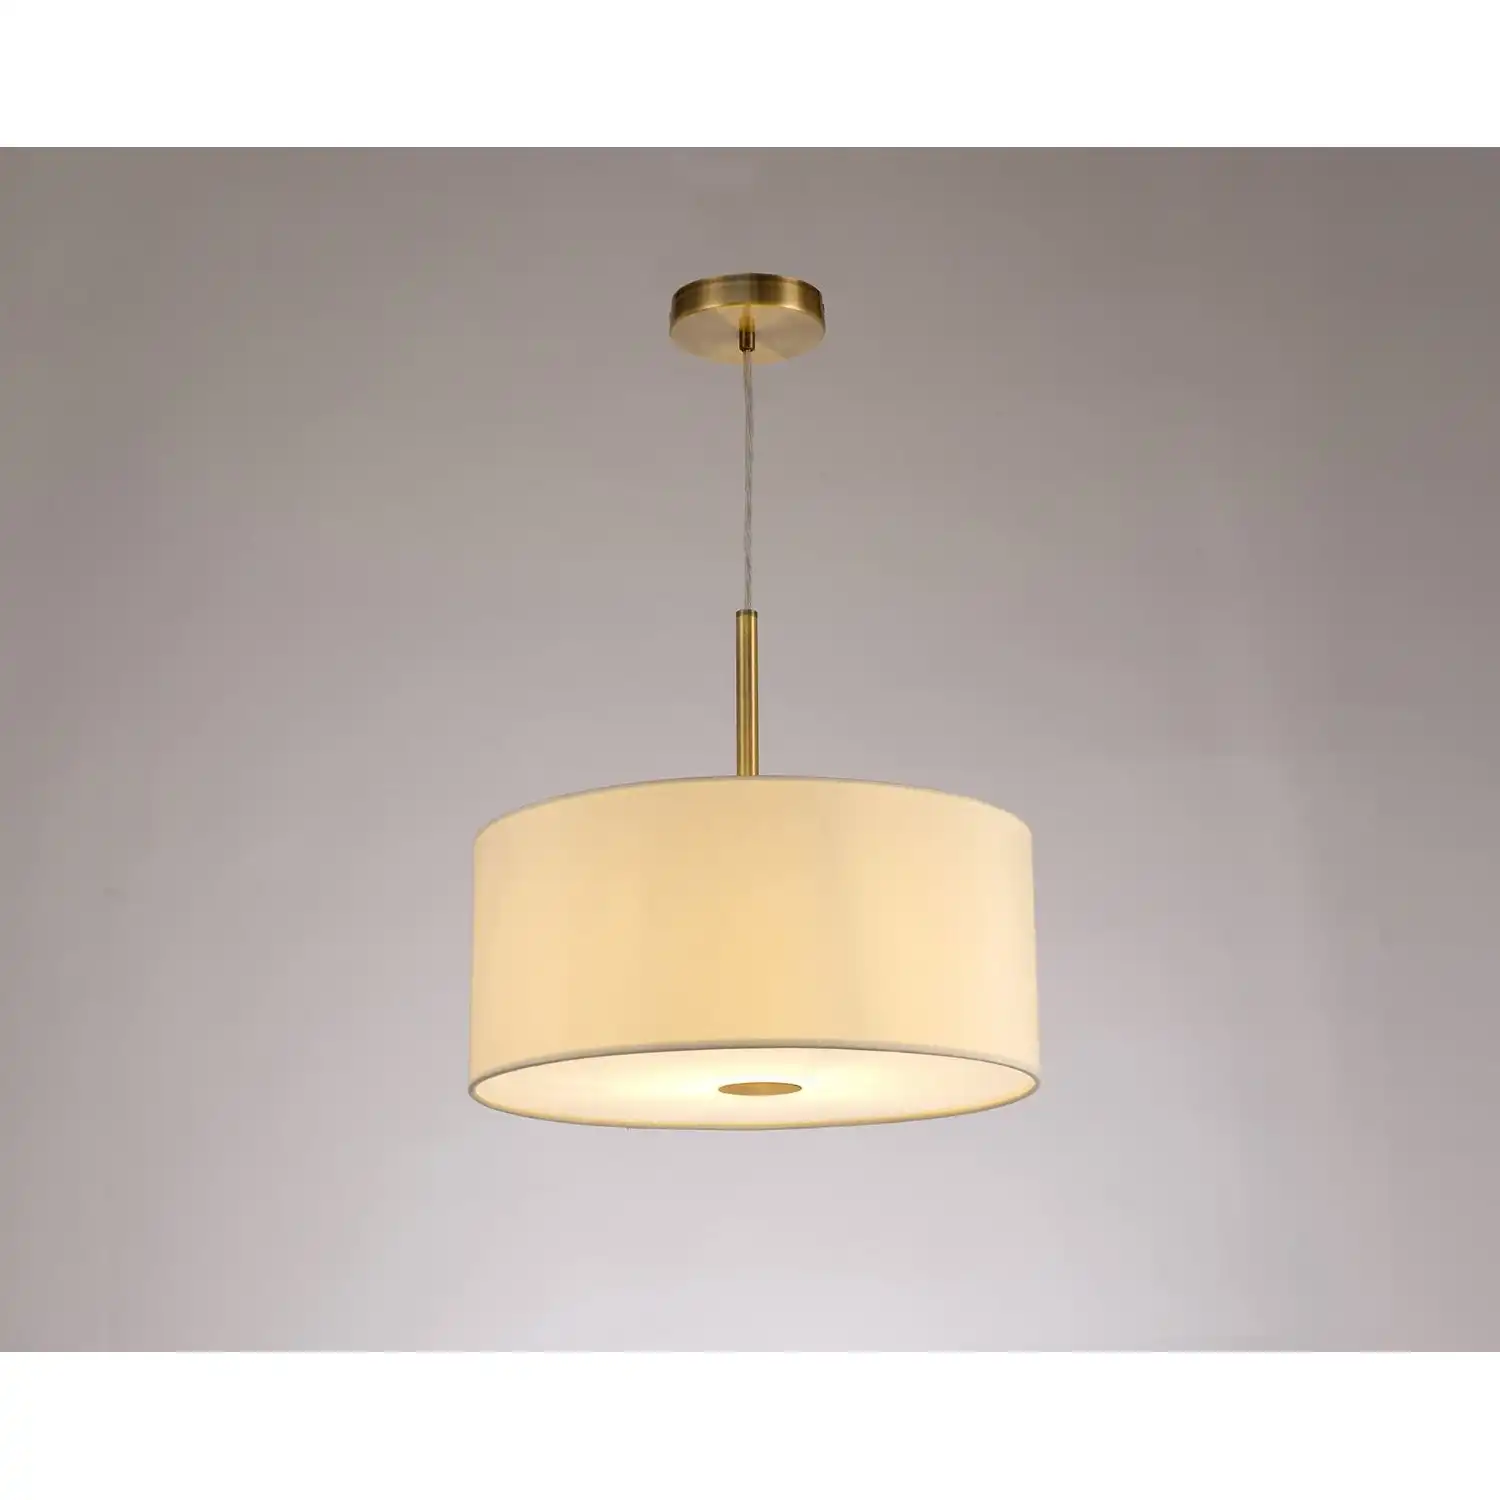 Baymont Antique Brass 1 Light E27 3m Single Pendant c w 400mm Faux Silk Shade, Ivory Pearl White Laminate c w 400mm Frosted AB Acrylic Diffuser